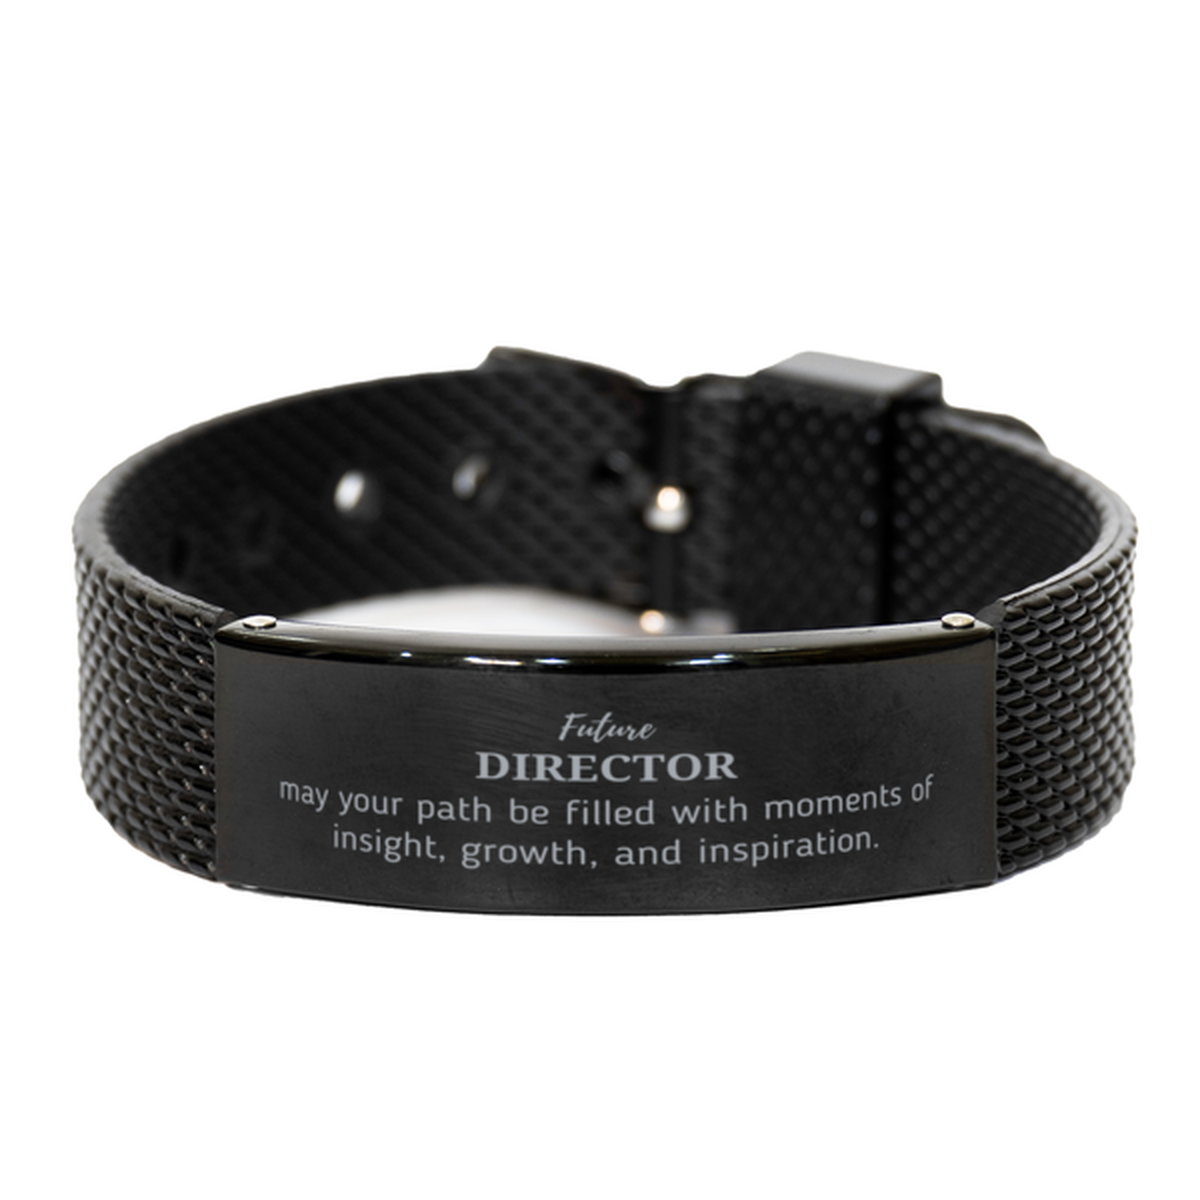 Future Director Gifts, May your path be filled with moments of insight, Graduation Gifts for New Director, Christmas Unique Black Shark Mesh Bracelet For Men, Women, Friends